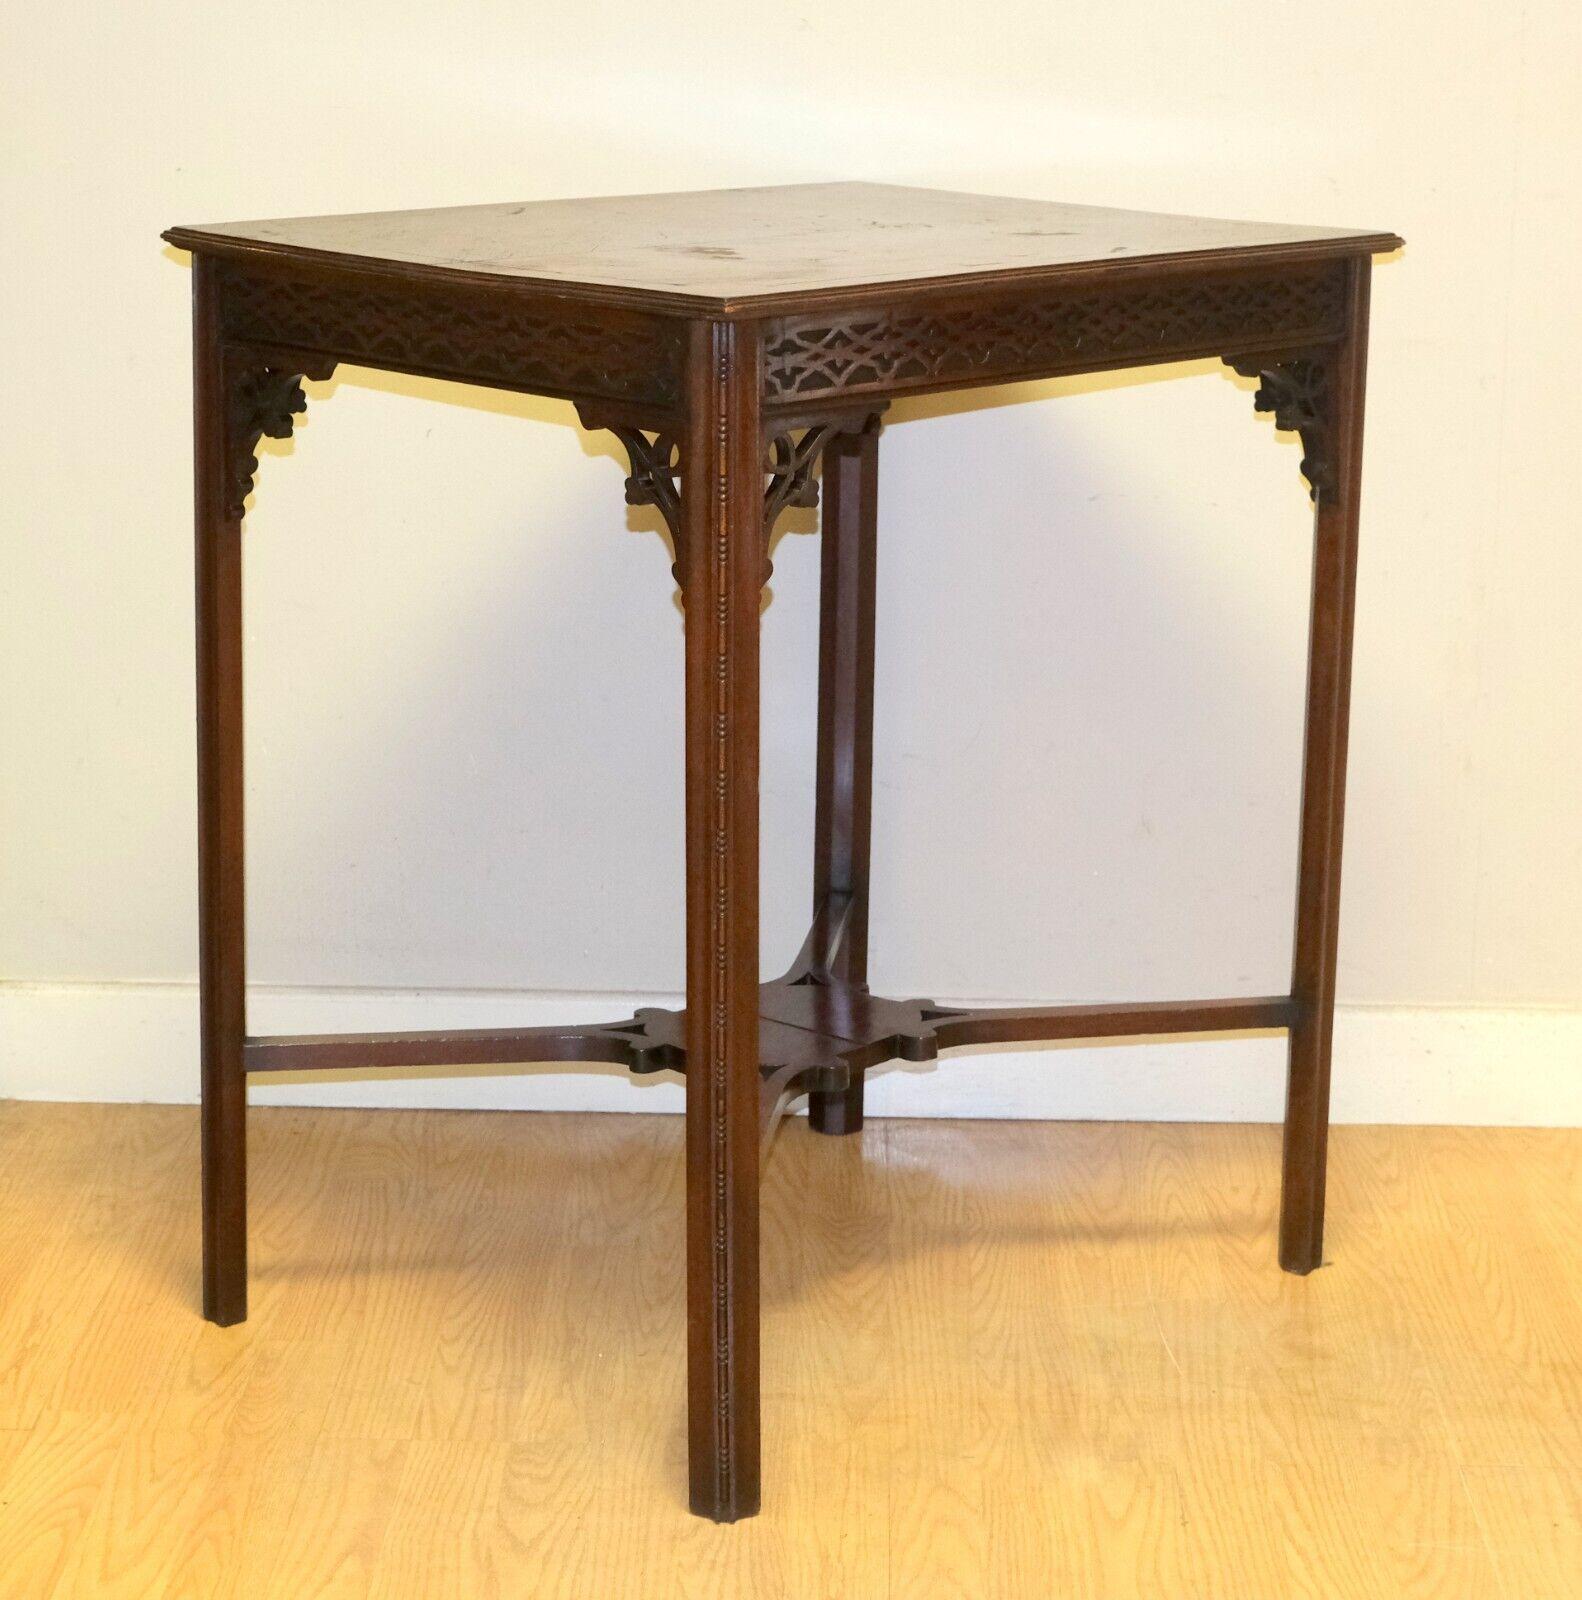 English LOVELY ANTIQUE EDWARDIAN HARDWOOD SiDE TABLE STRAIGHT LEGS & CARVING For Sale